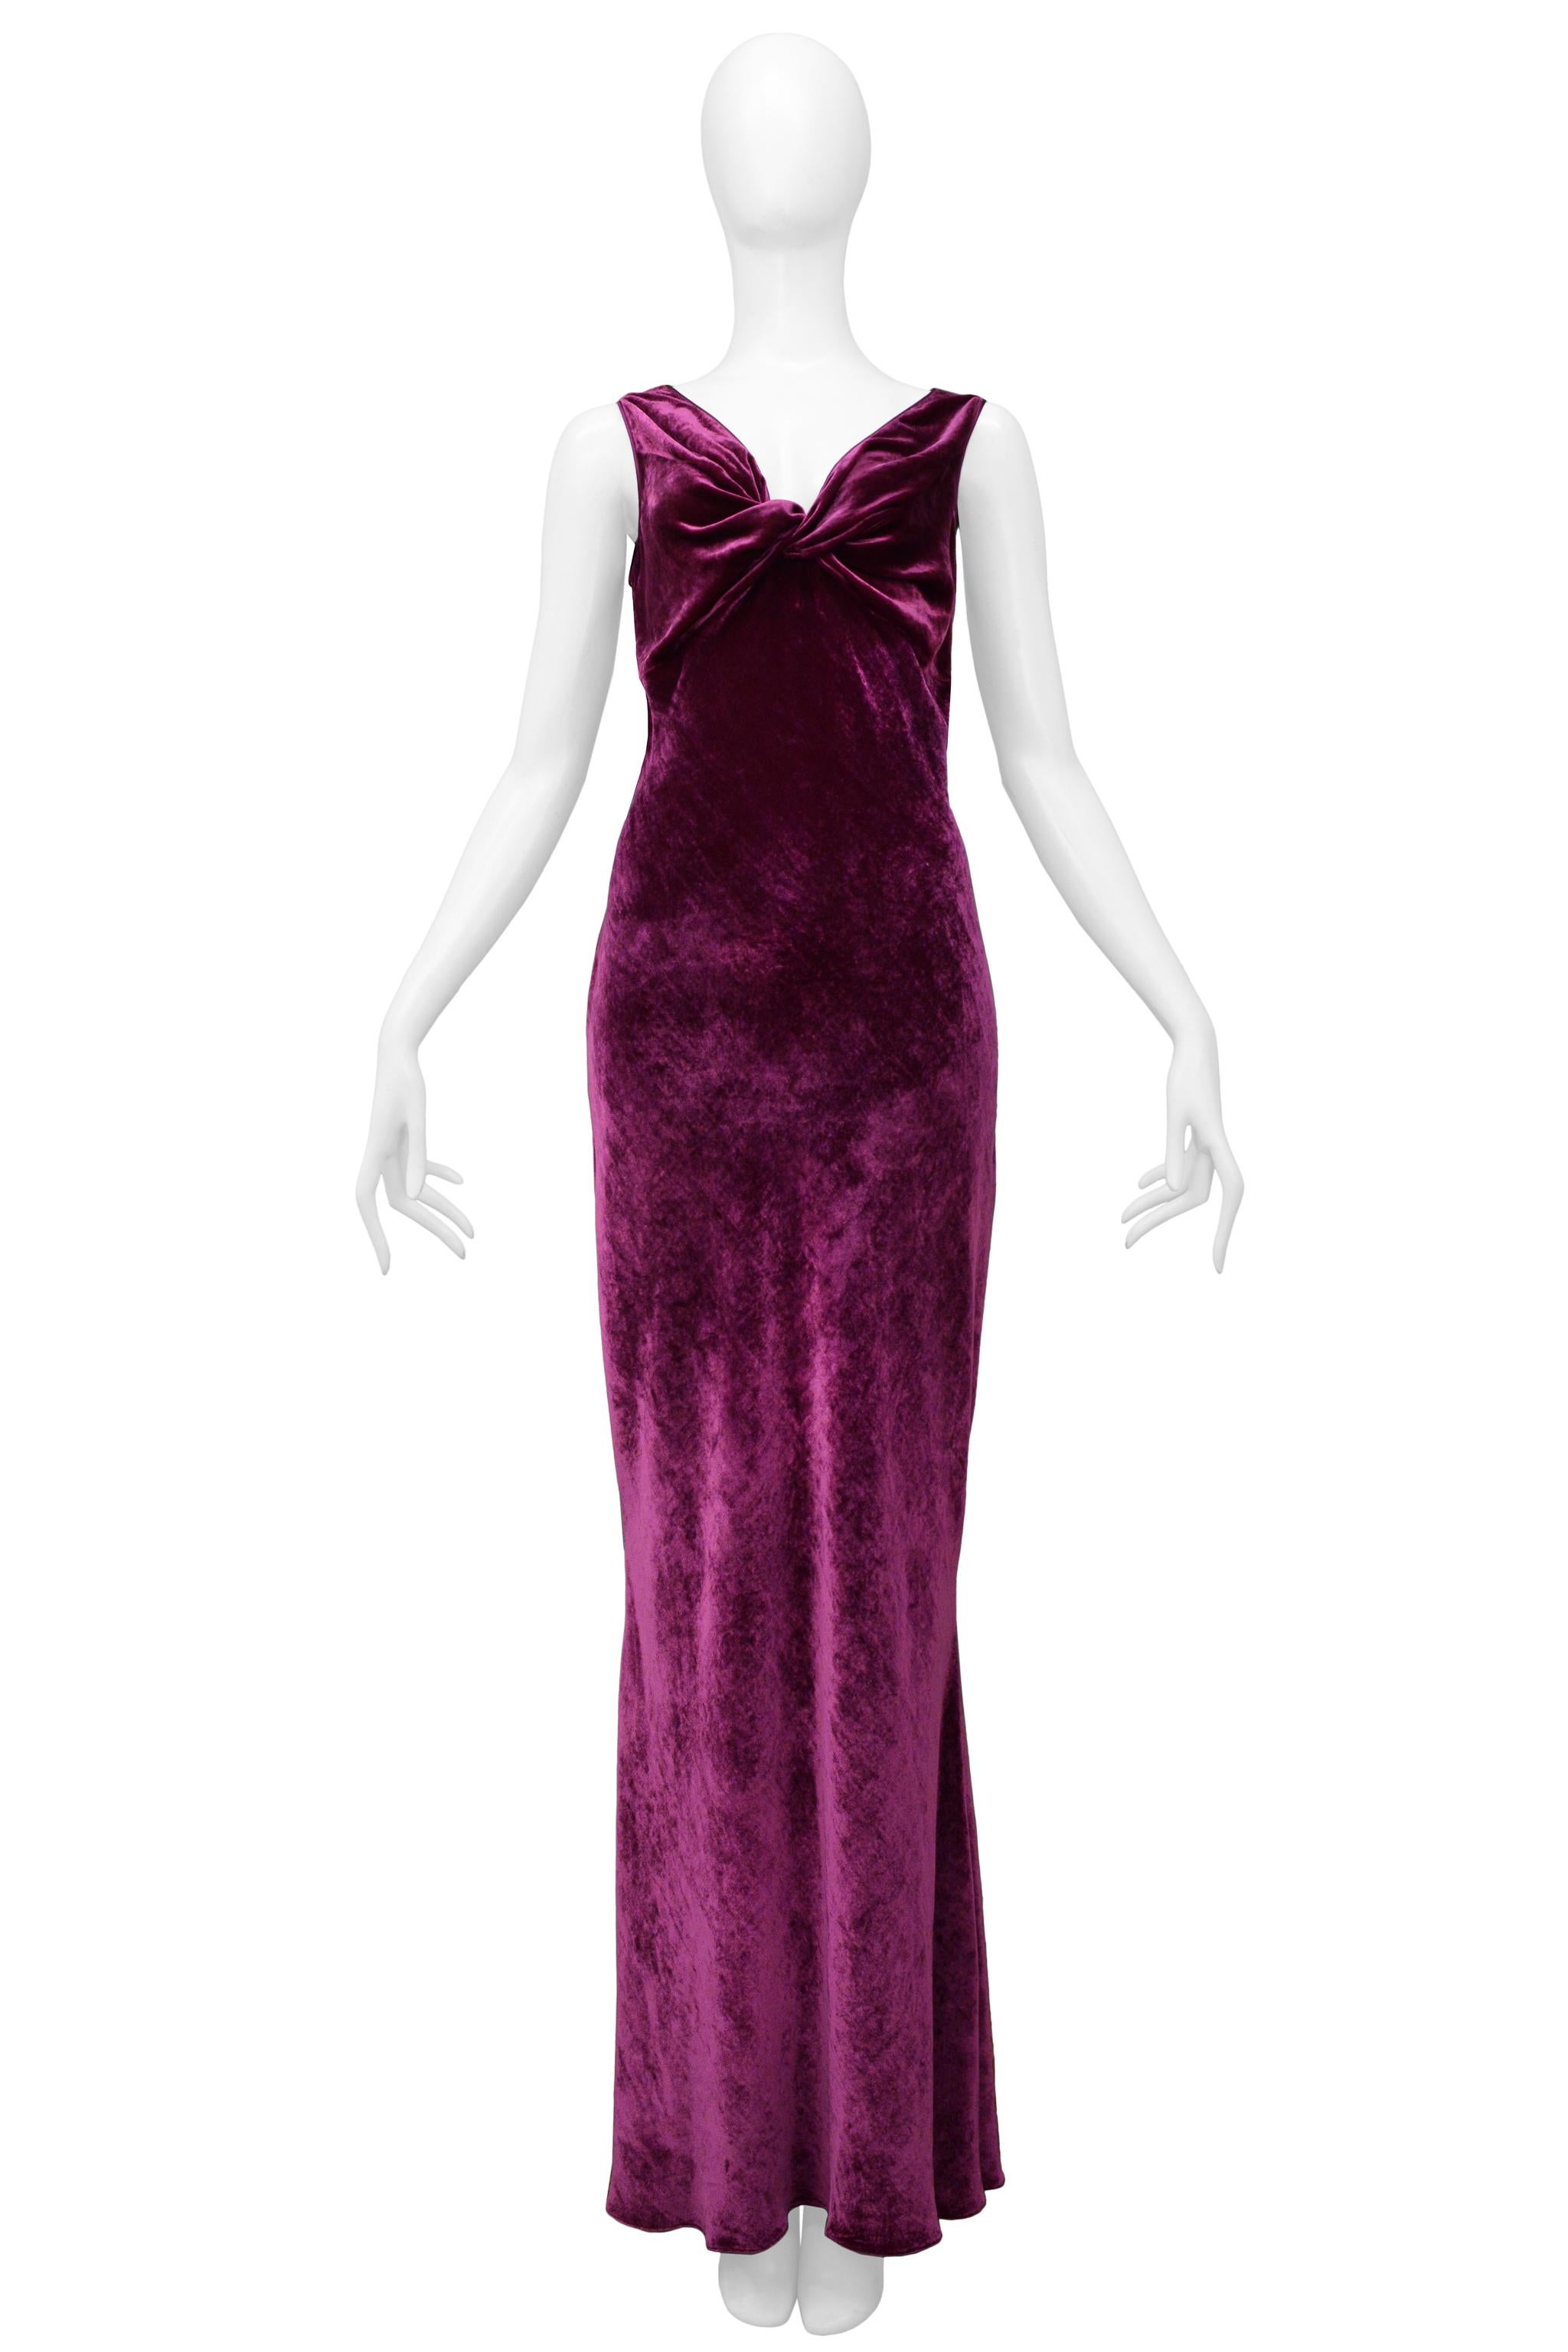 Resurrection is excited to offer a vintage John Galliano magenta velvet gown featuring a plunging front and back neckline, knot detail at bust, and wide straps. 

John Galliano
44
82% Viscose/ 18%Silk
2006 Runway Collection 
Very Good Vintage